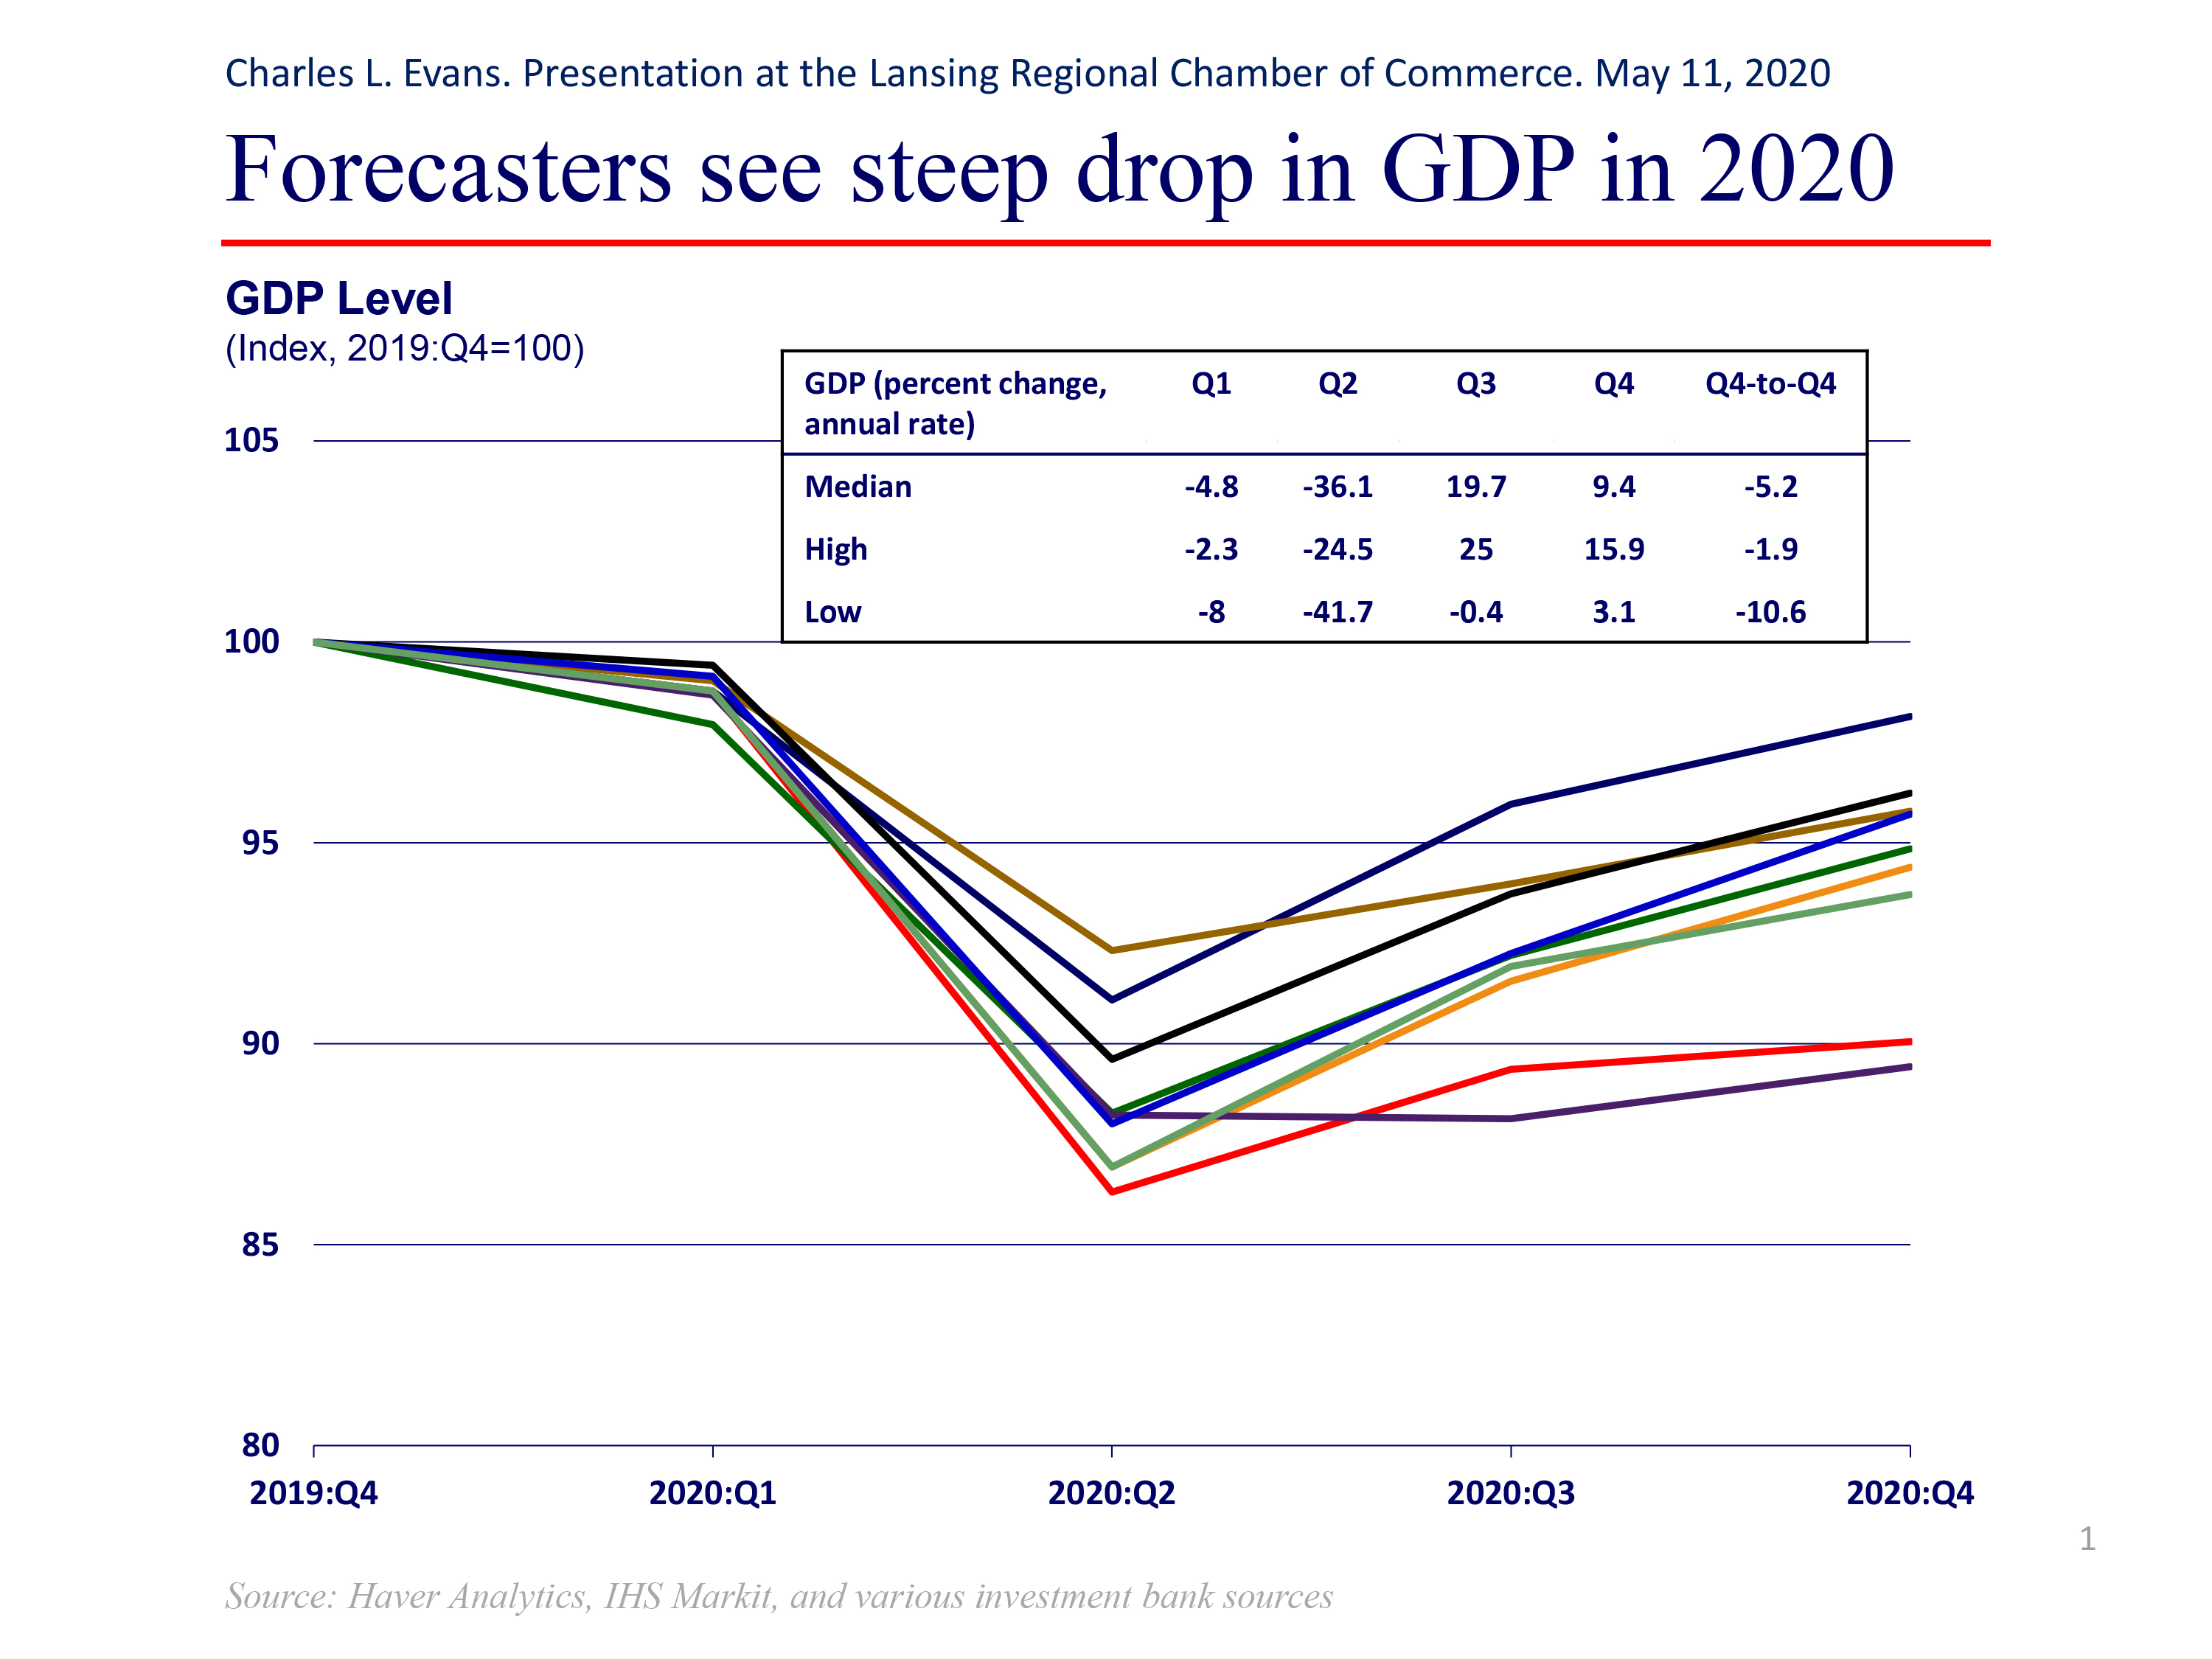 Forecasters see steep drop in GDP in 2020. The median estimate for Q2 2020 is -36.1. 